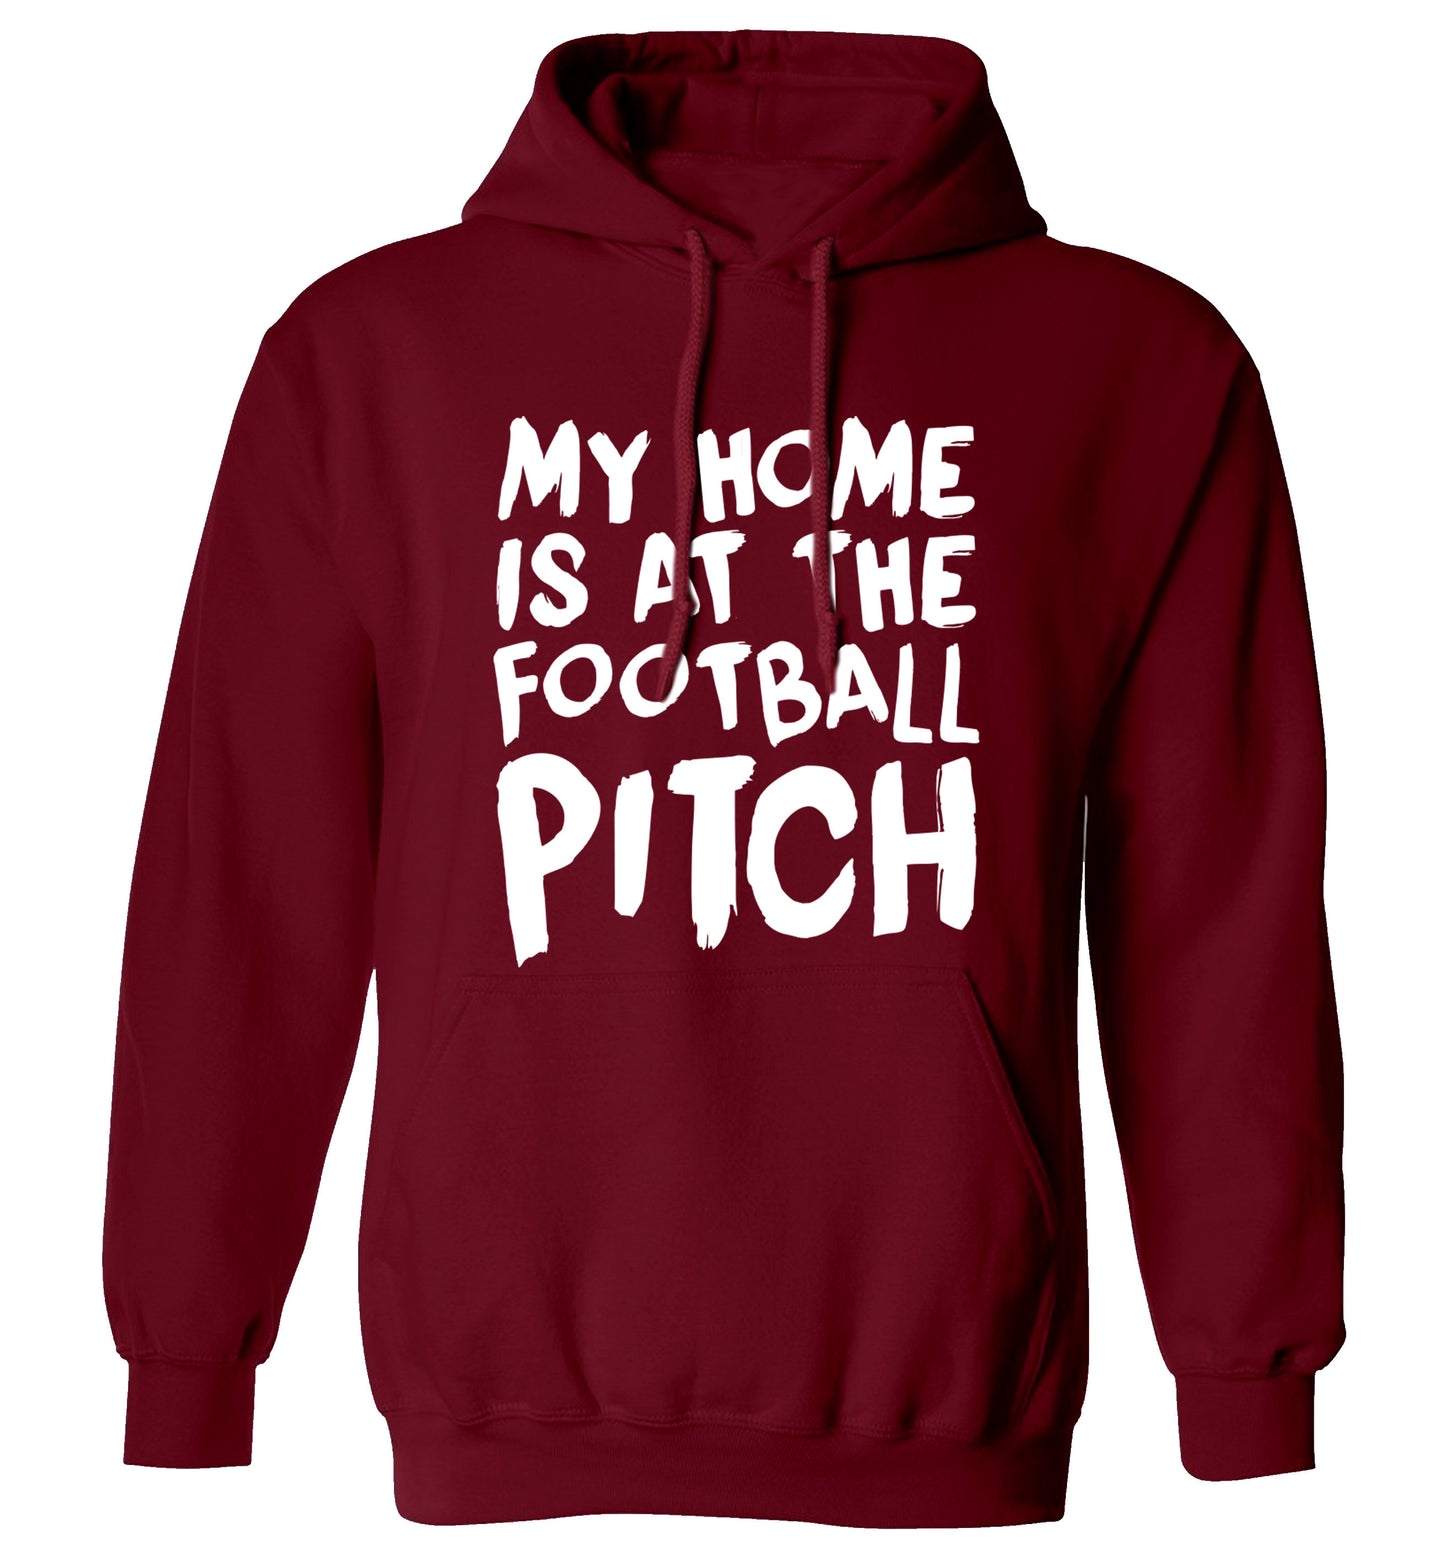 My home is at the football pitch adults unisex maroon hoodie 2XL